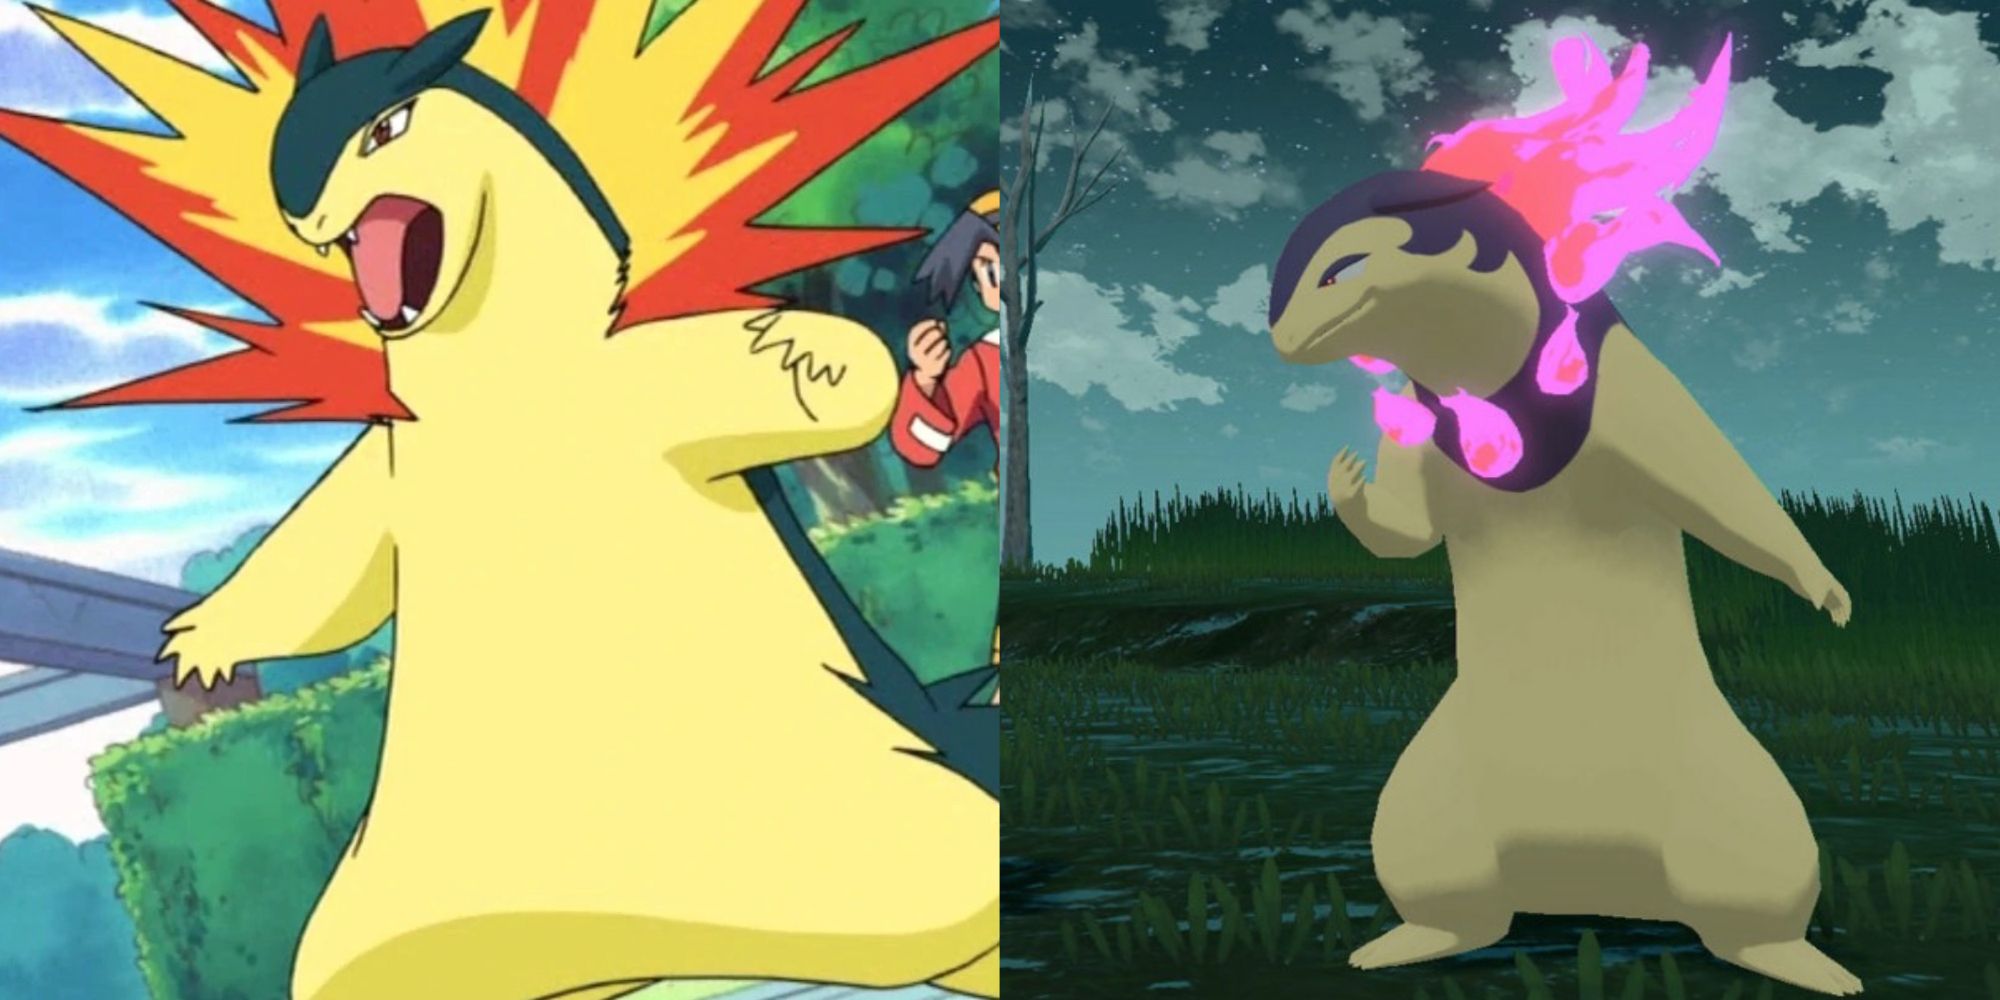 Anime Typhlosion roaring in battle, Hisuian Typhlosion chilling at night in Legends: Arceus